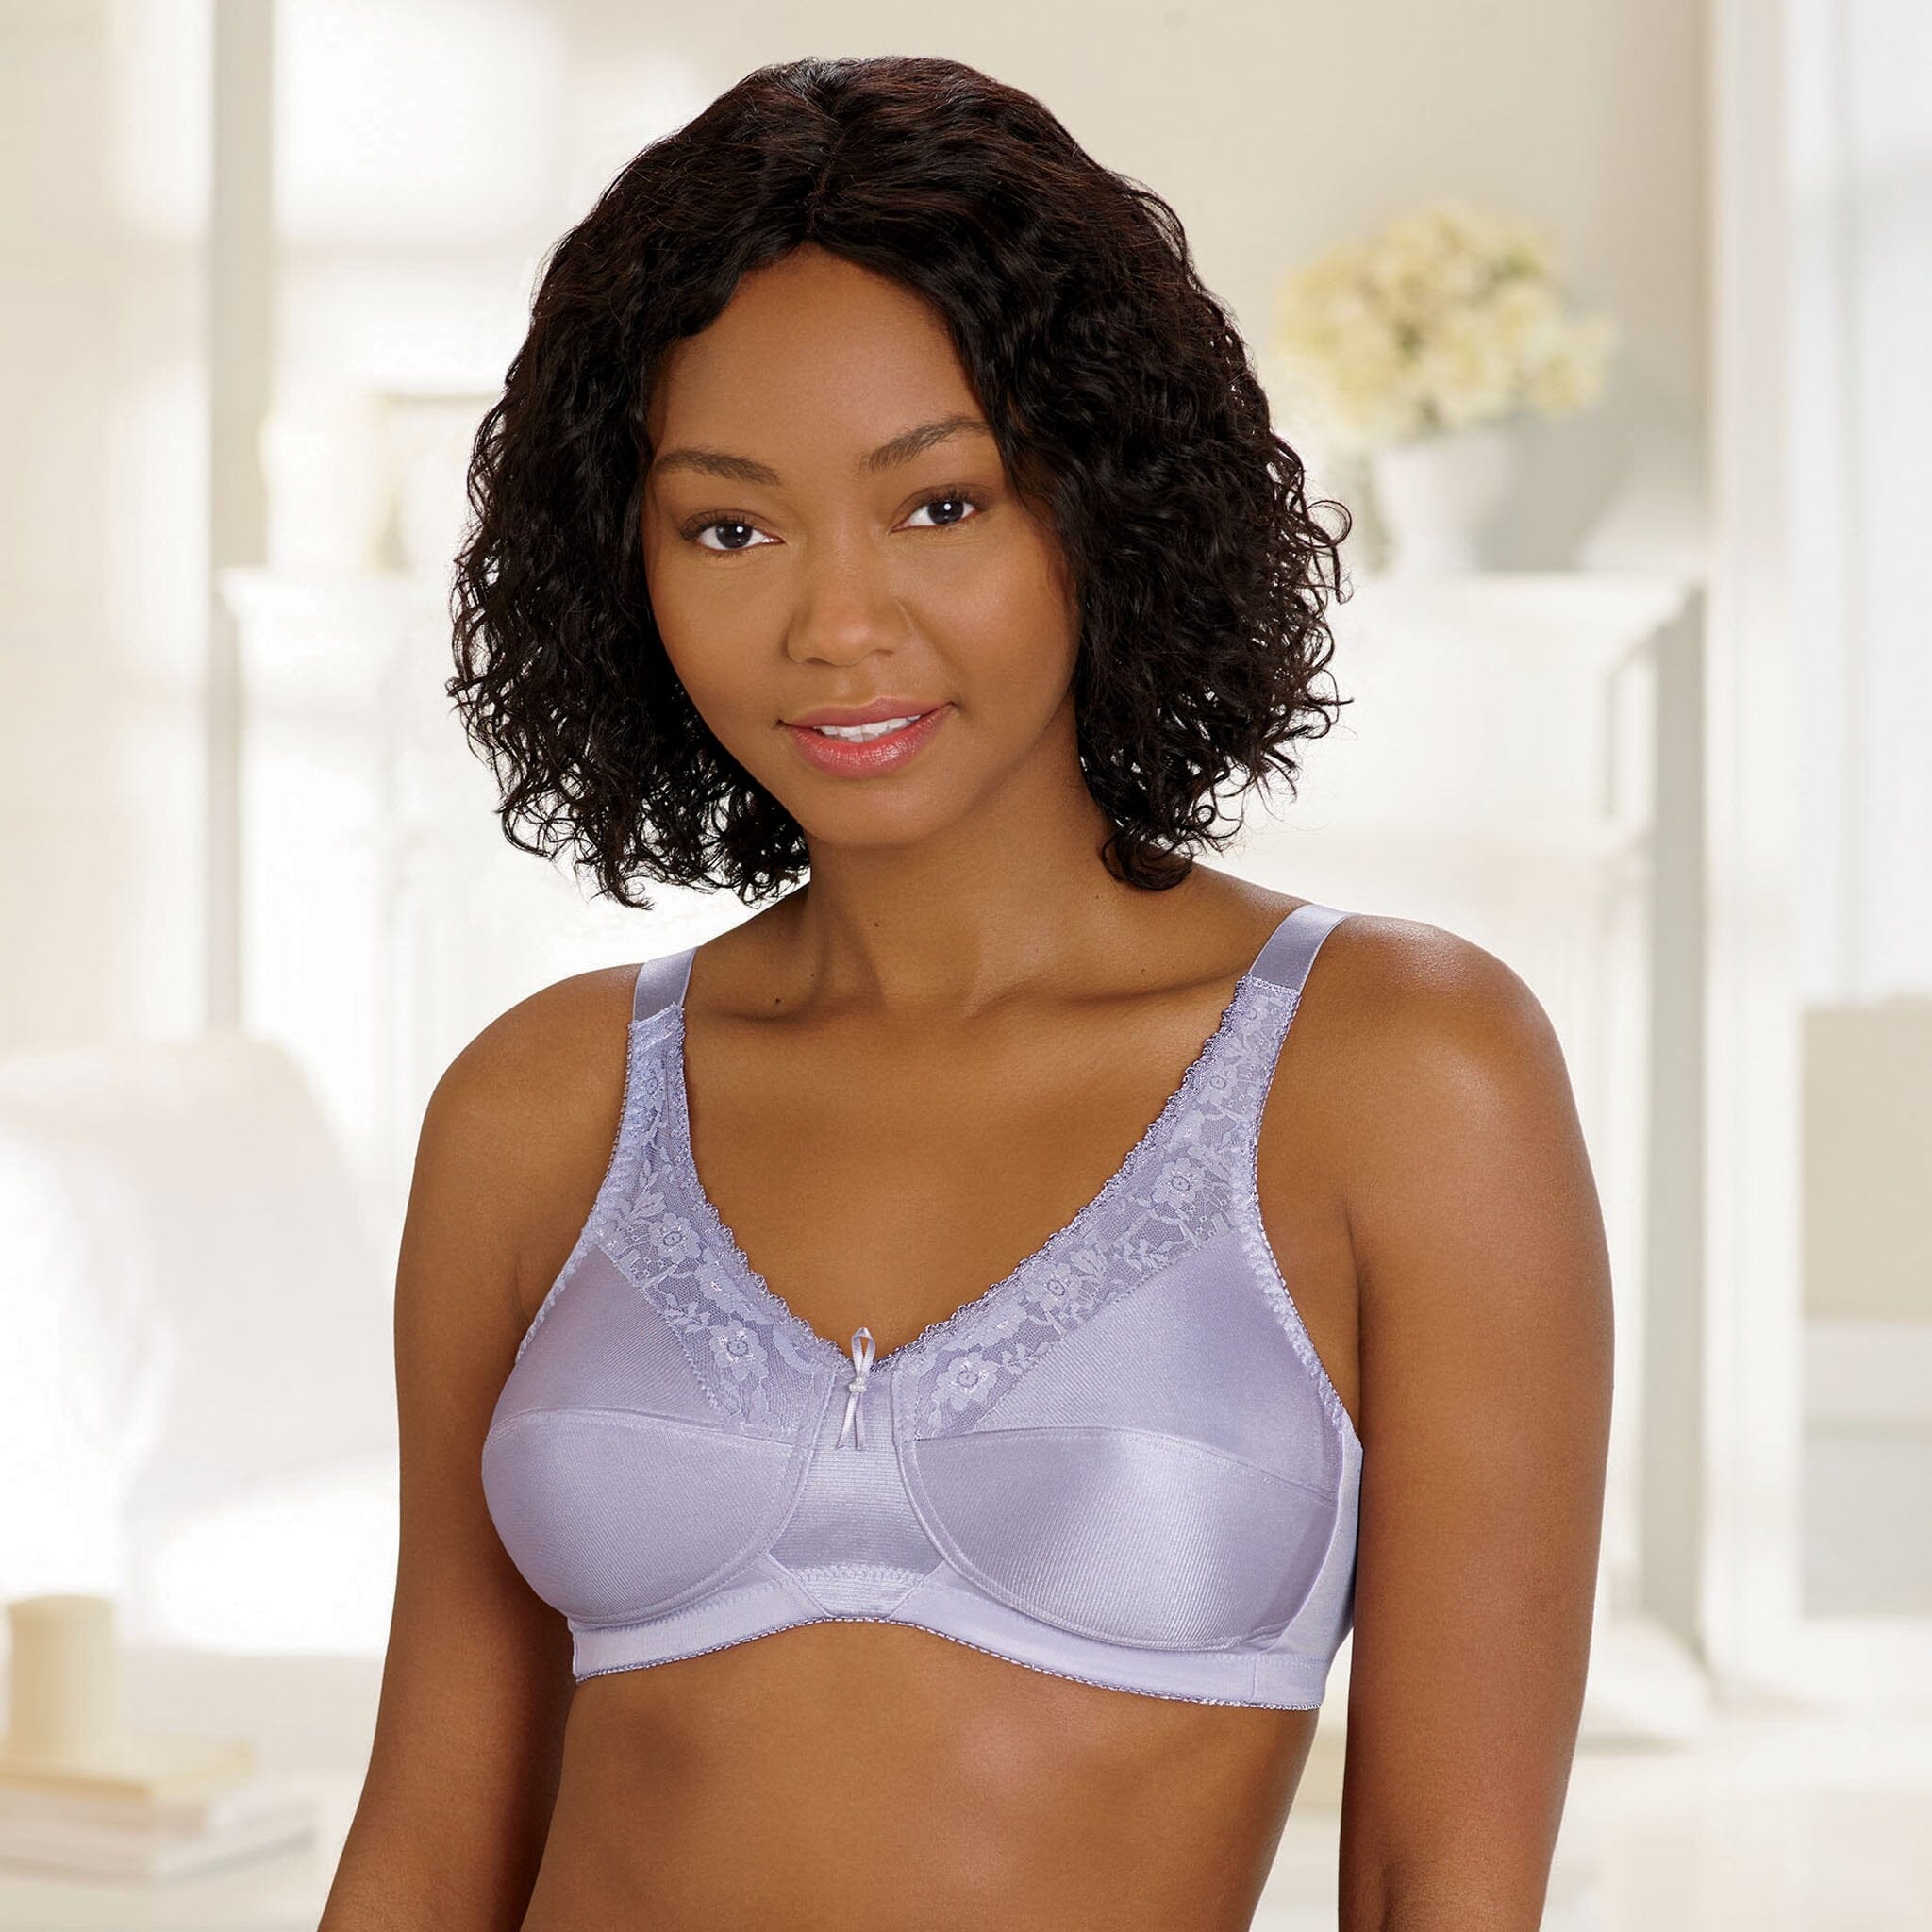 Long bra 40B with various lace appliqués, breathable full cup, and  underwire